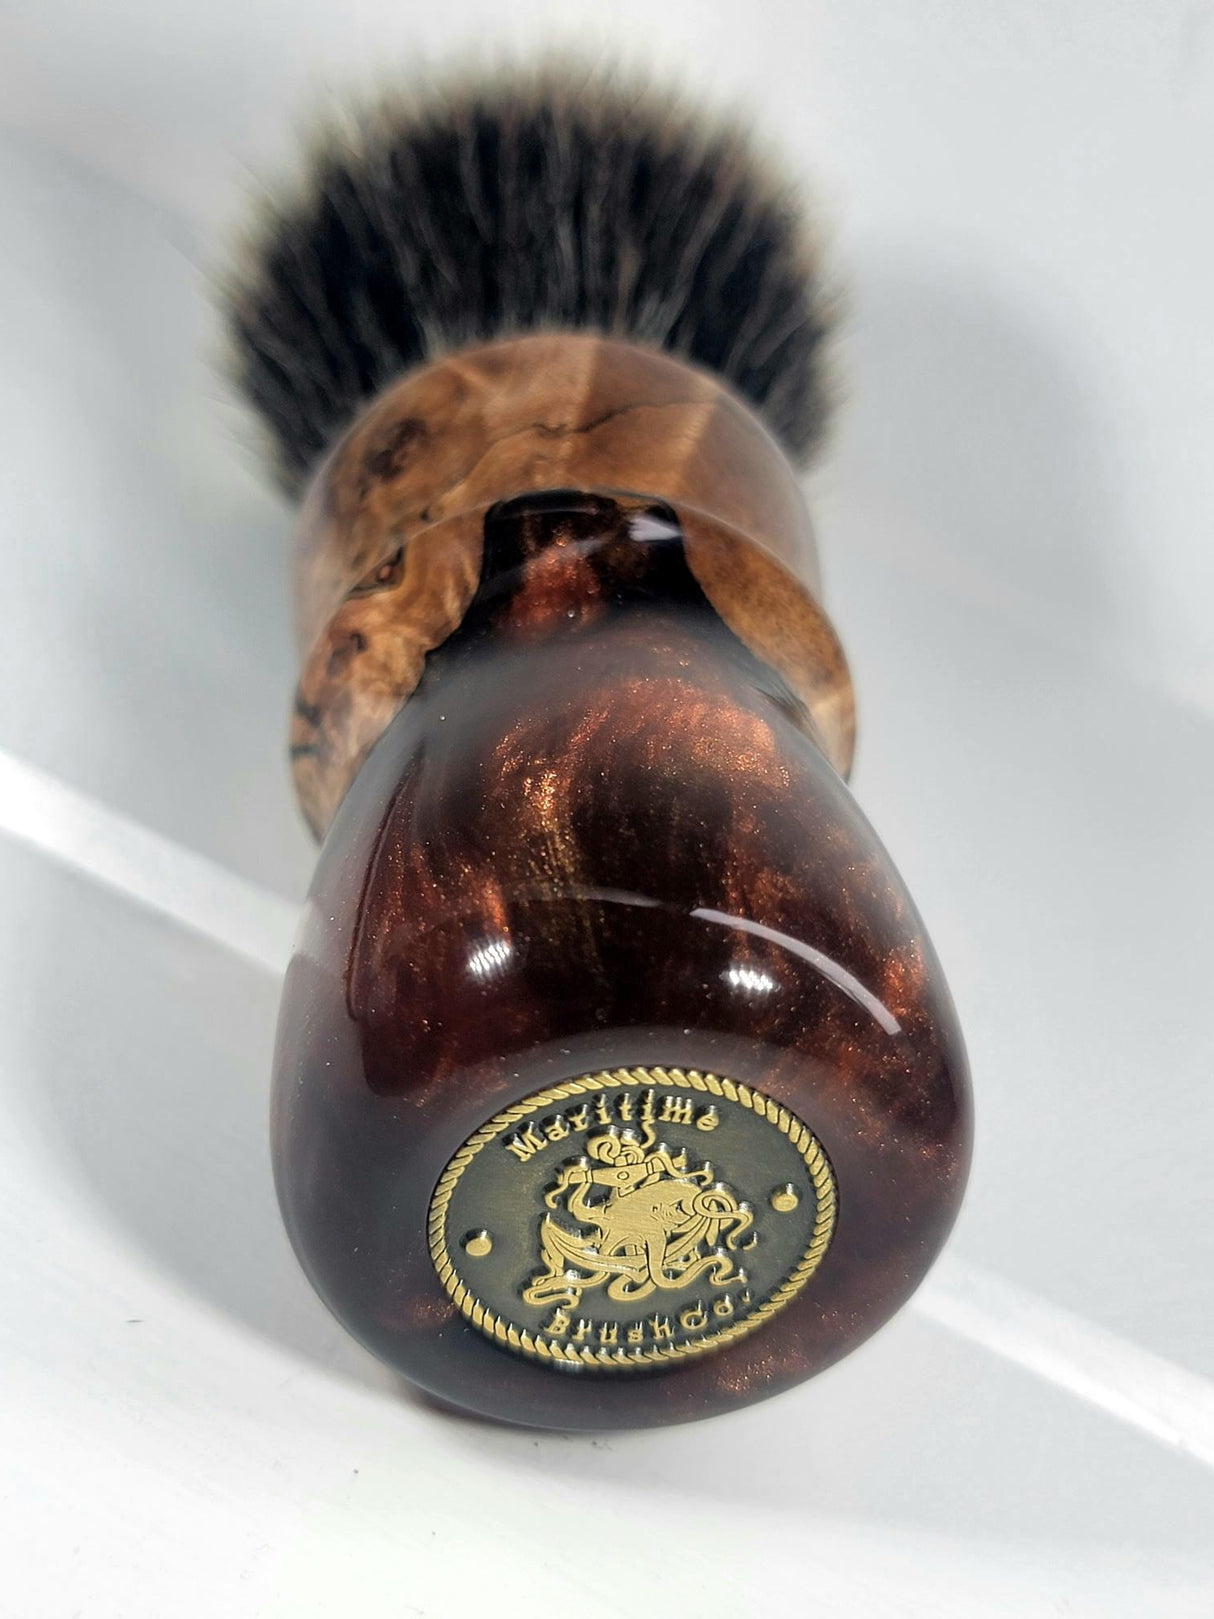 Maritime Brush Co. - Sea Shore - 26mm Spalted Maple Burl and Resin - Premium M5C Fan Synthetic (SHD) Knot